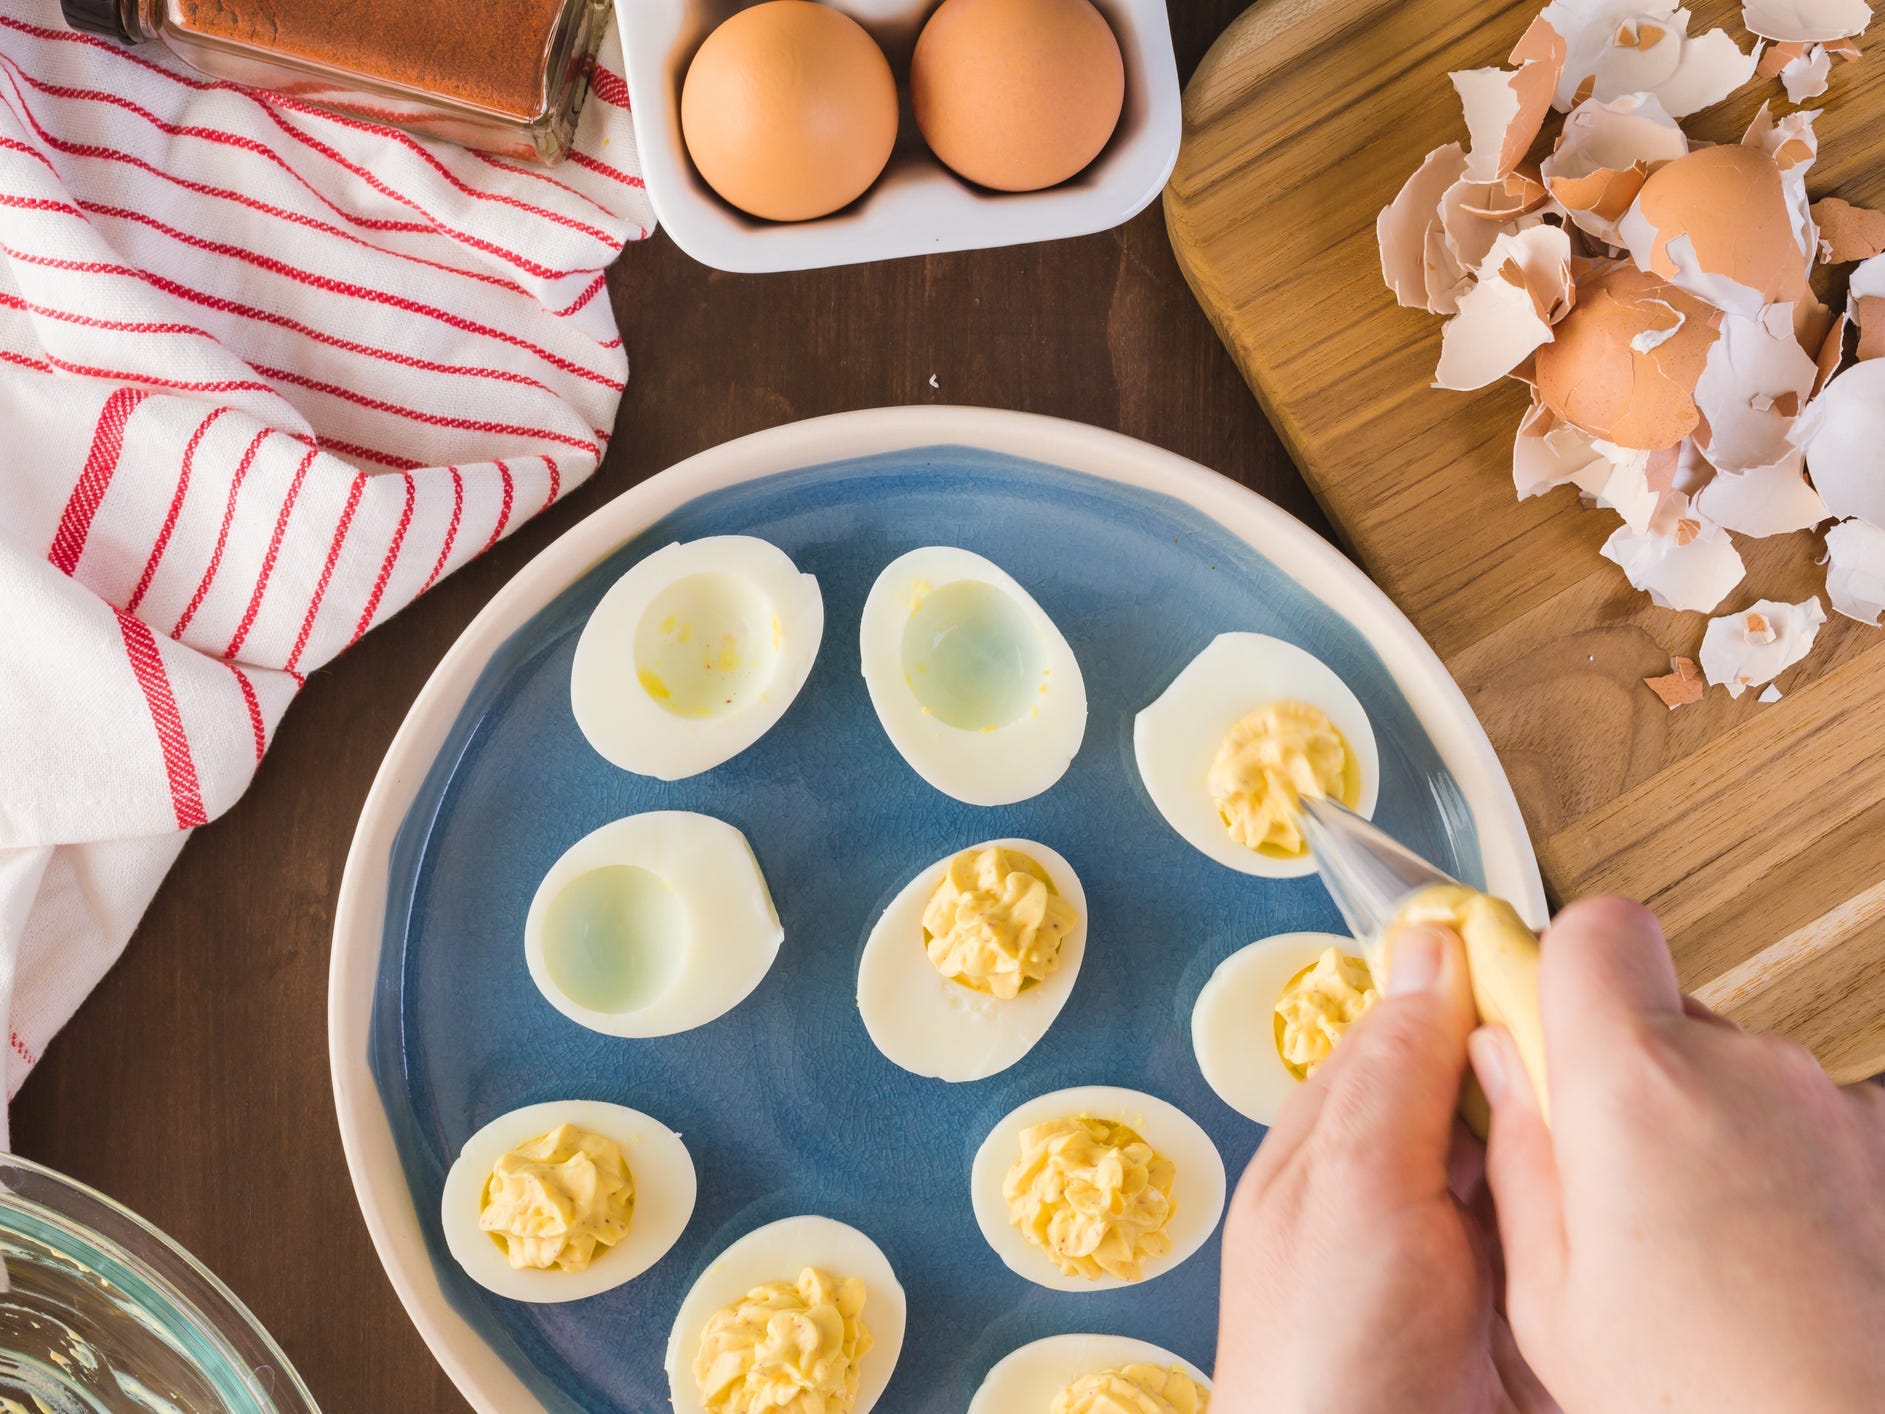 A pair of hands piping egg yolk filling into hard-boiled egg whites to make deviled eggs